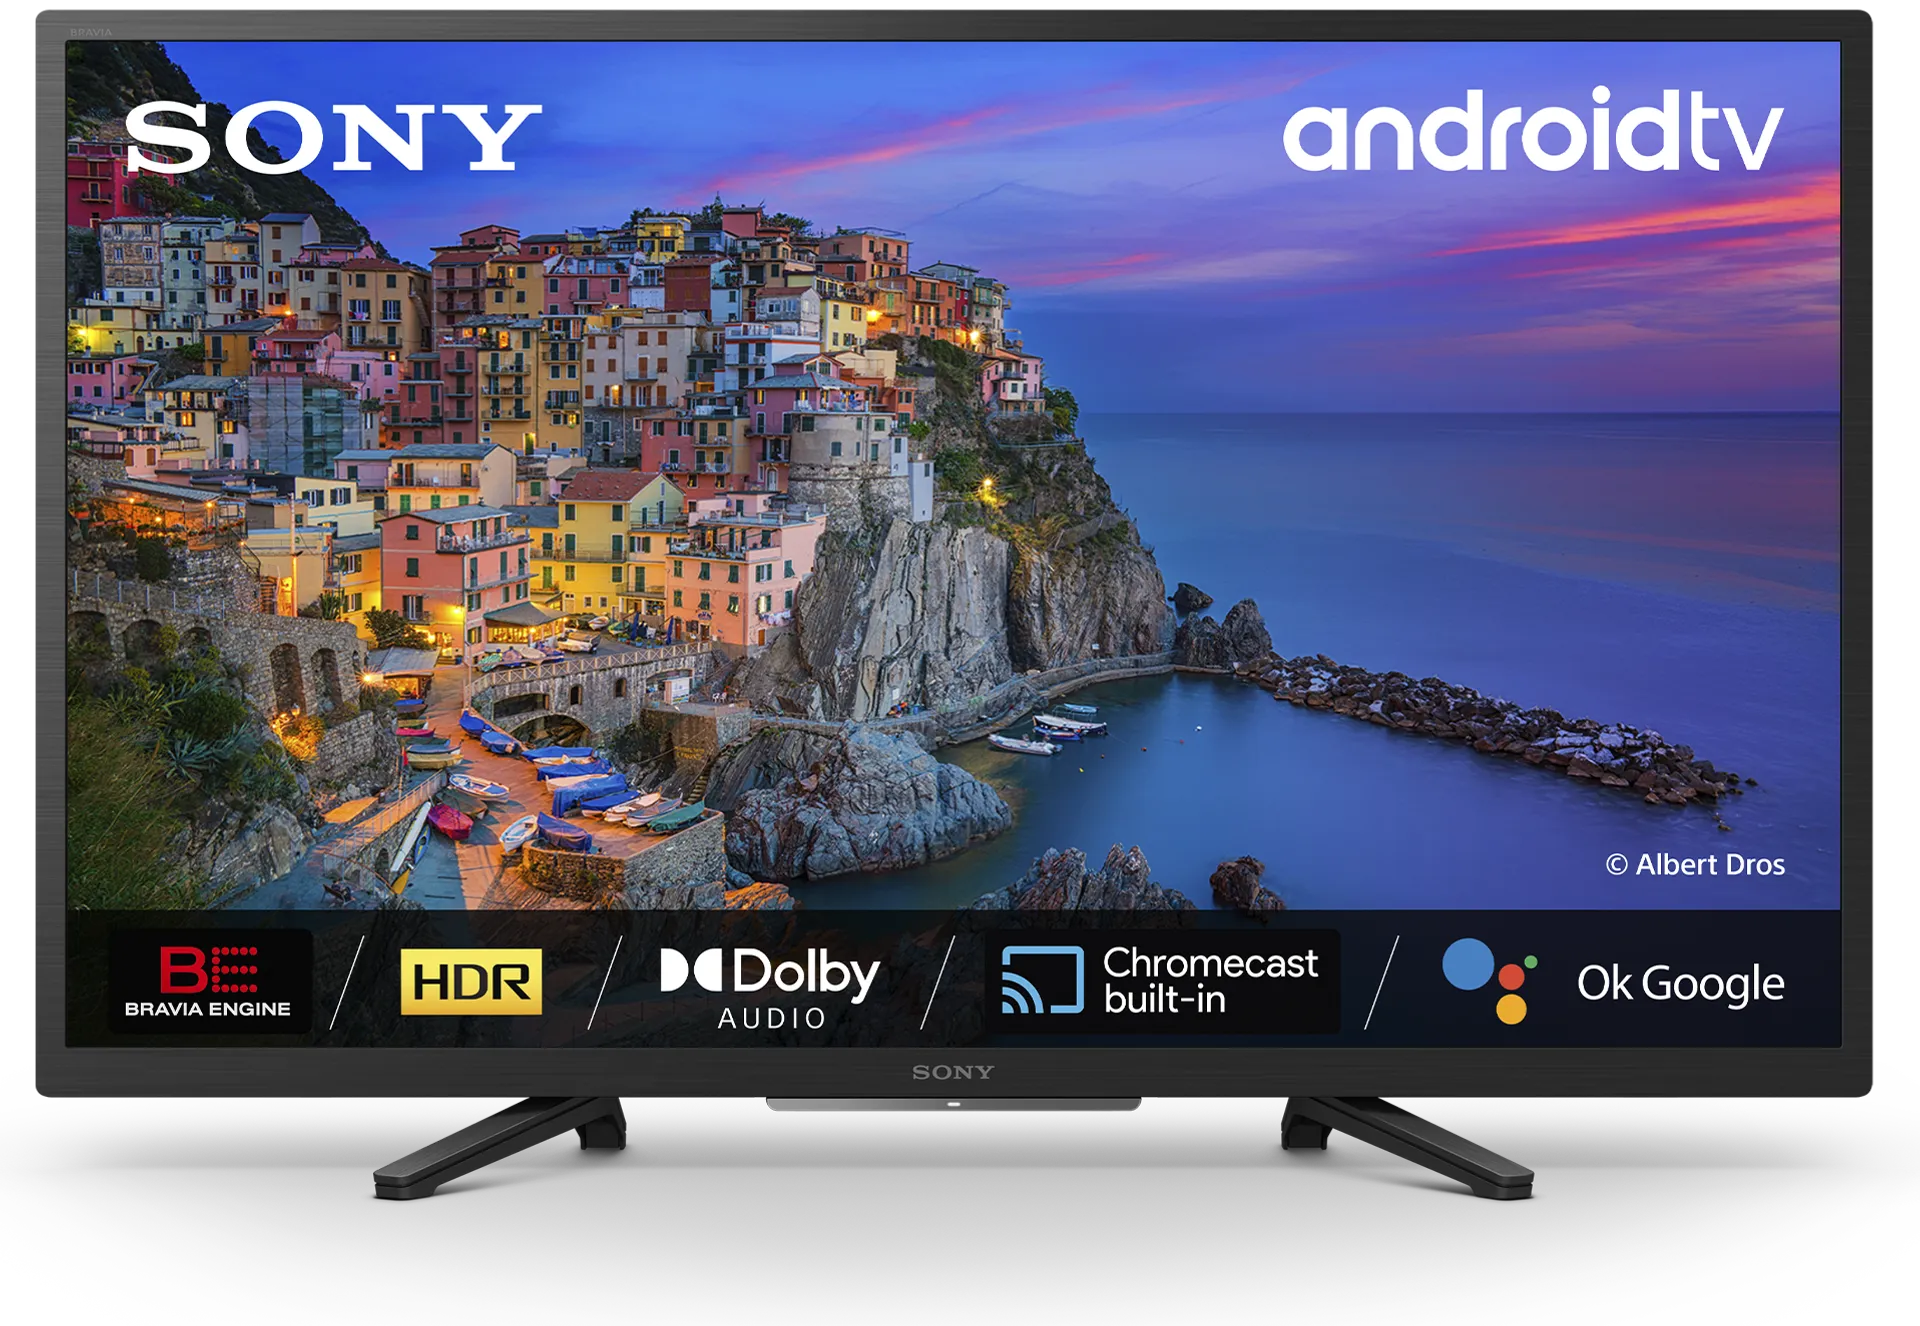 Sony KD-32W804 32" HD Ready Android Smart TV - 1